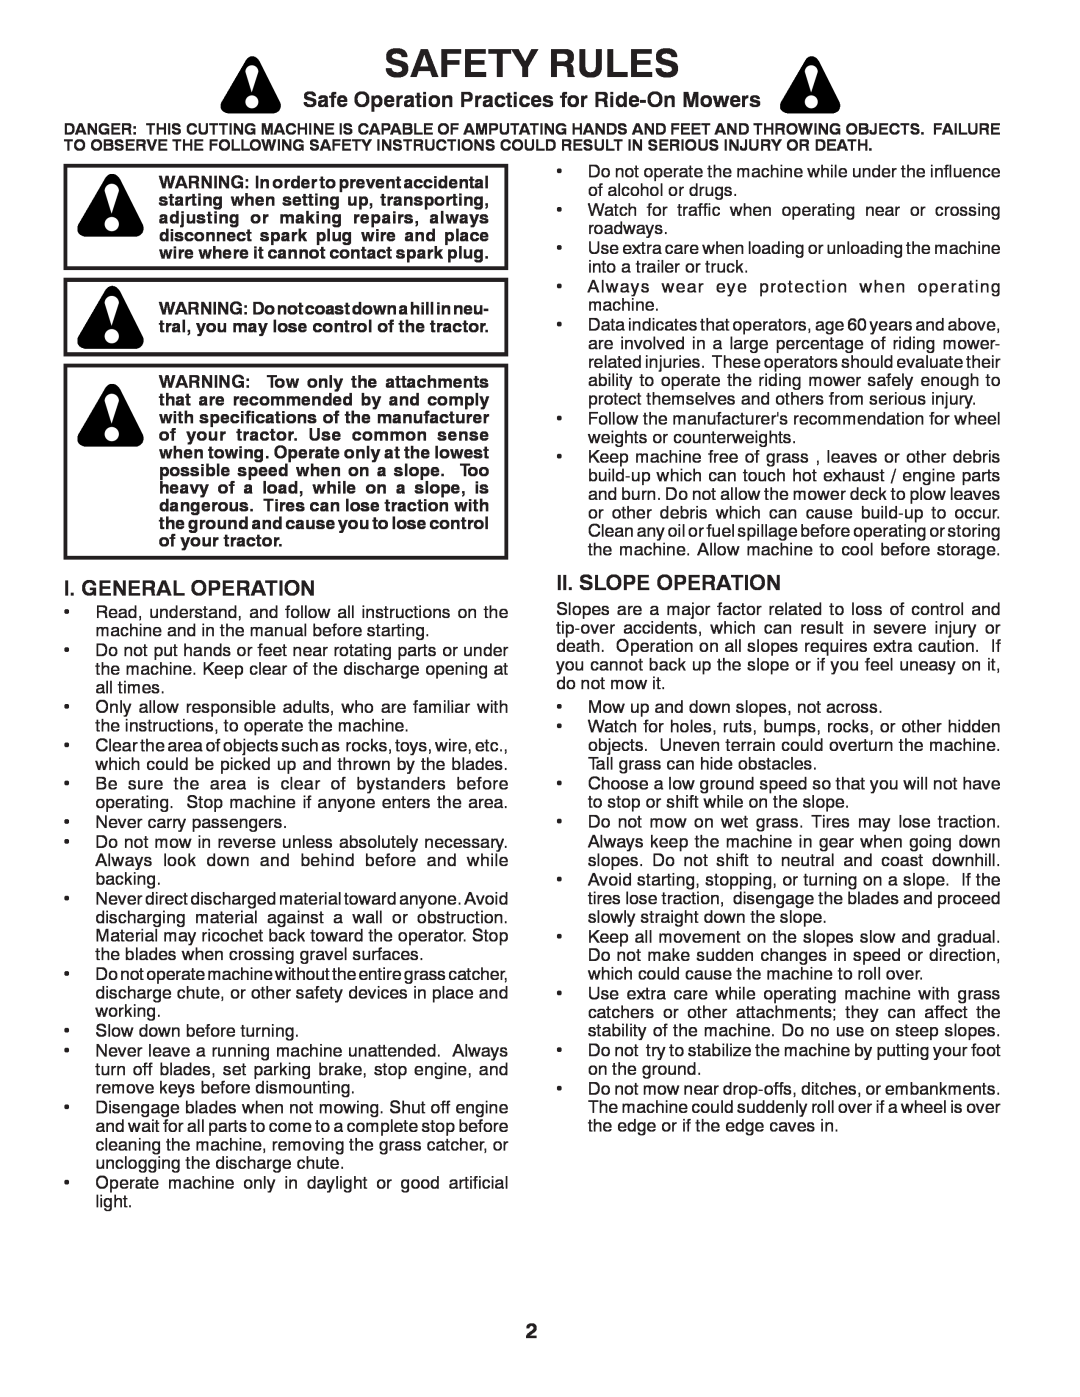 McCulloch M17538H Safety Rules, Safe Operation Practices for Ride-OnMowers, I. General Operation, Ii. Slope Operation 